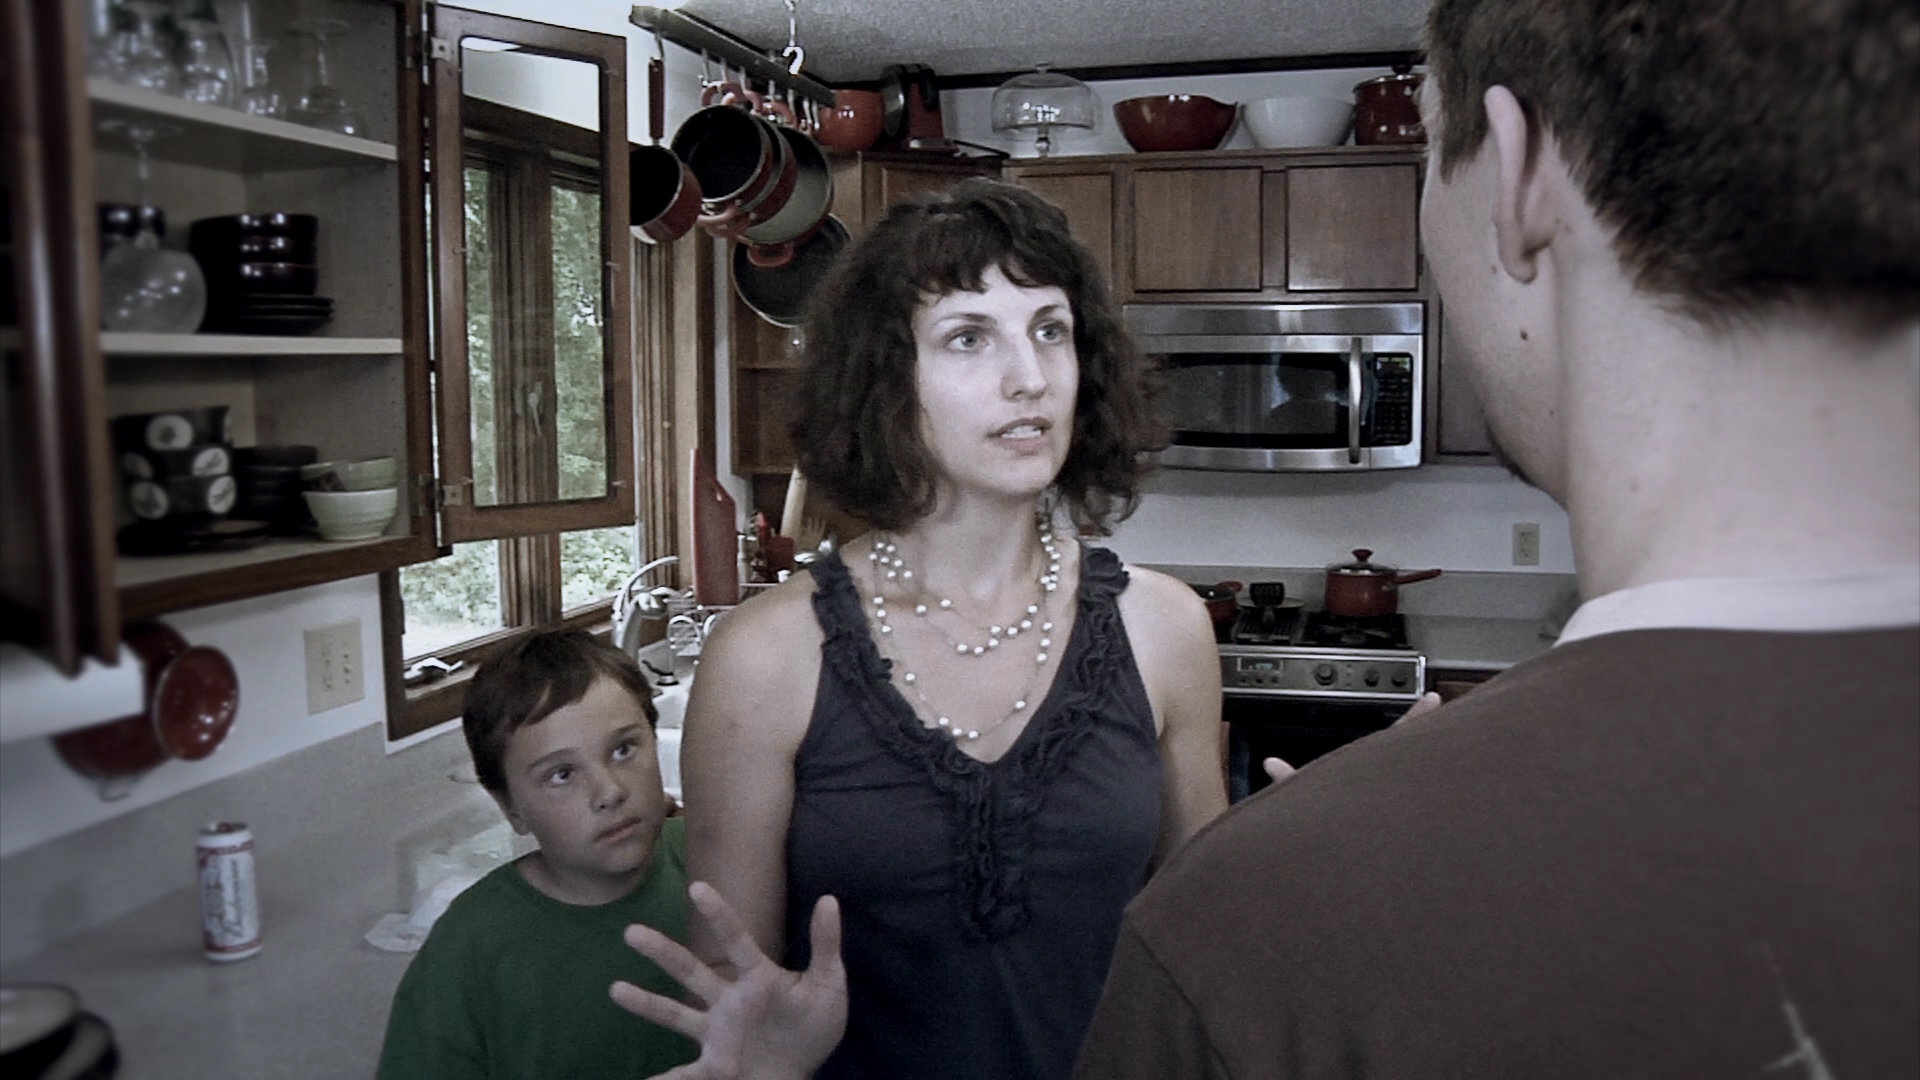 Jason Chausse, Tricia Bates and Llian Breen in a scene from 